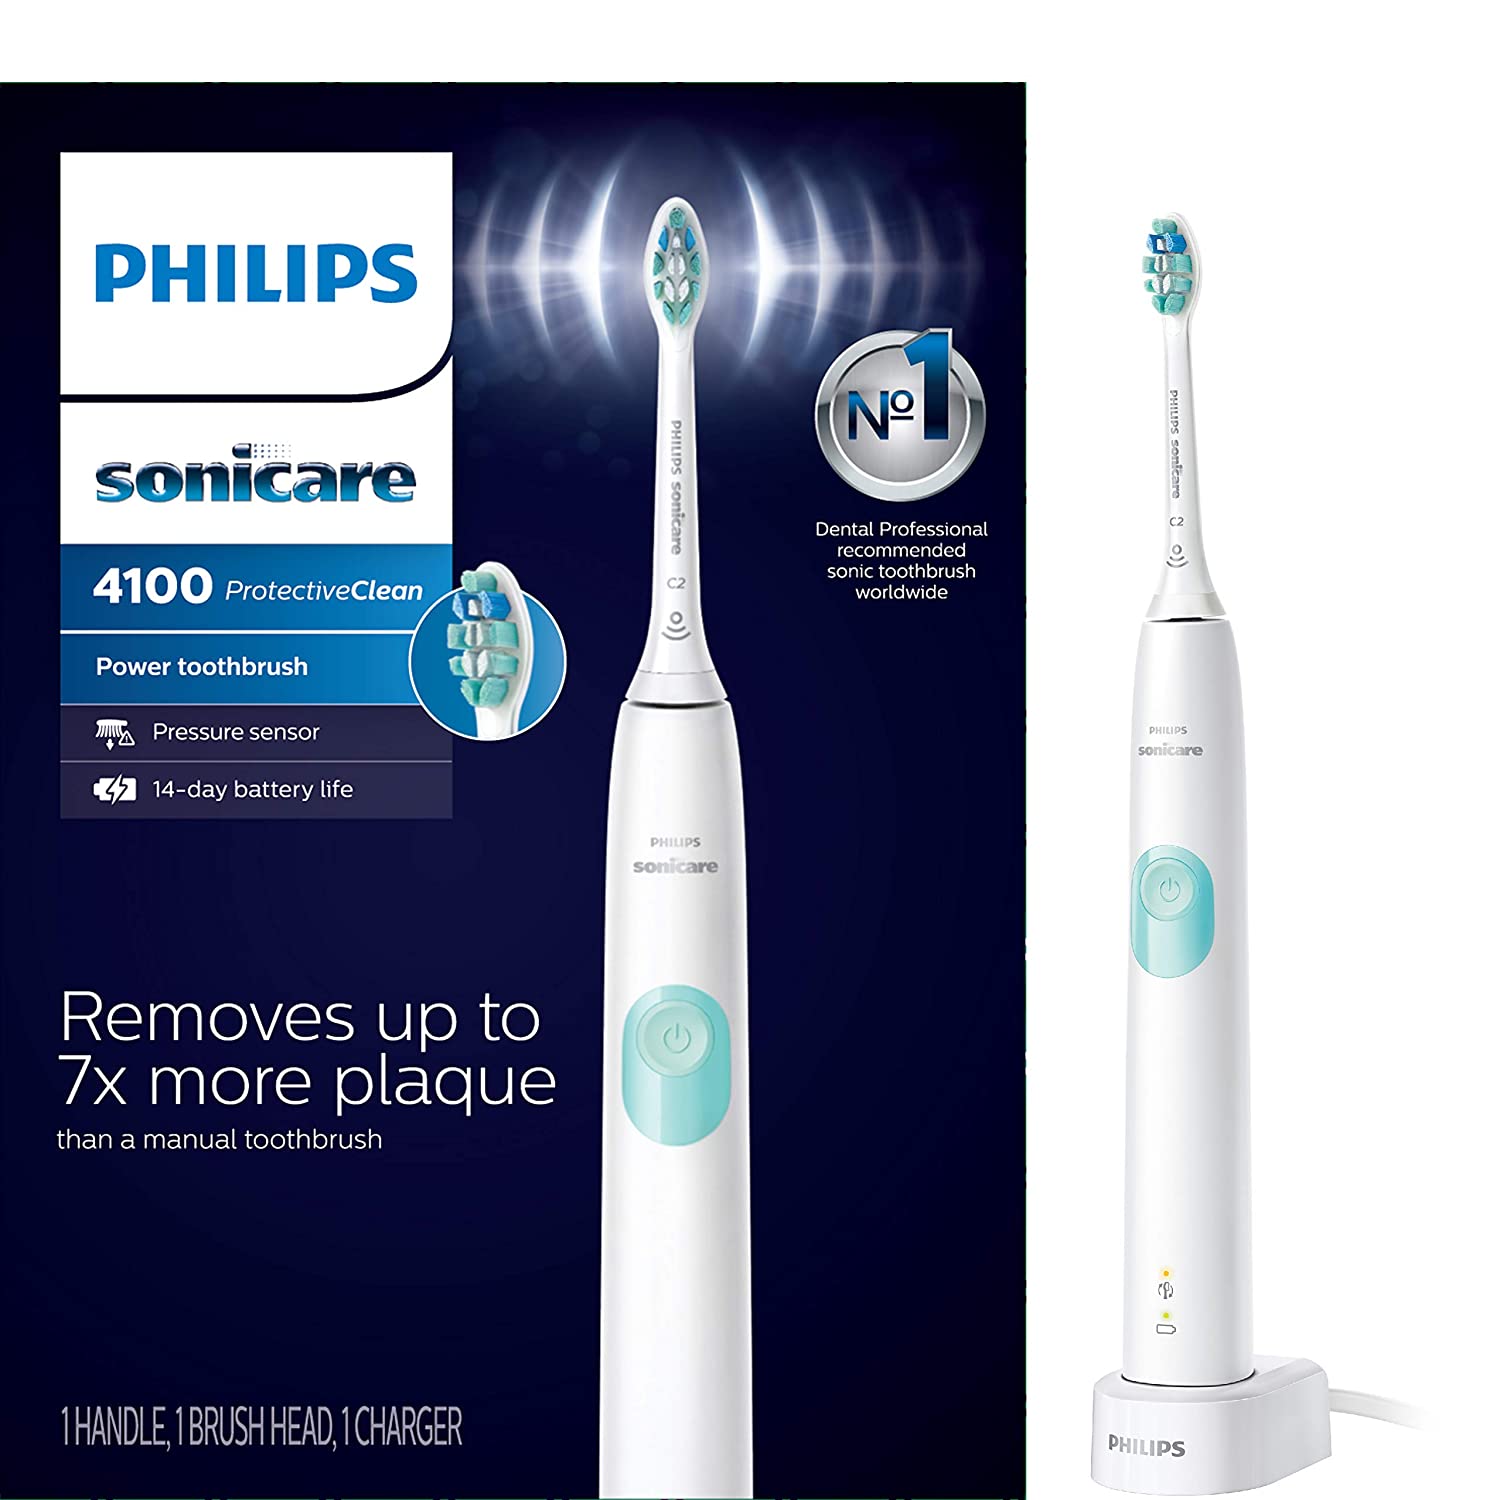 b-n-ch-i-i-n-philips-sonicare-protectiveclean-4100